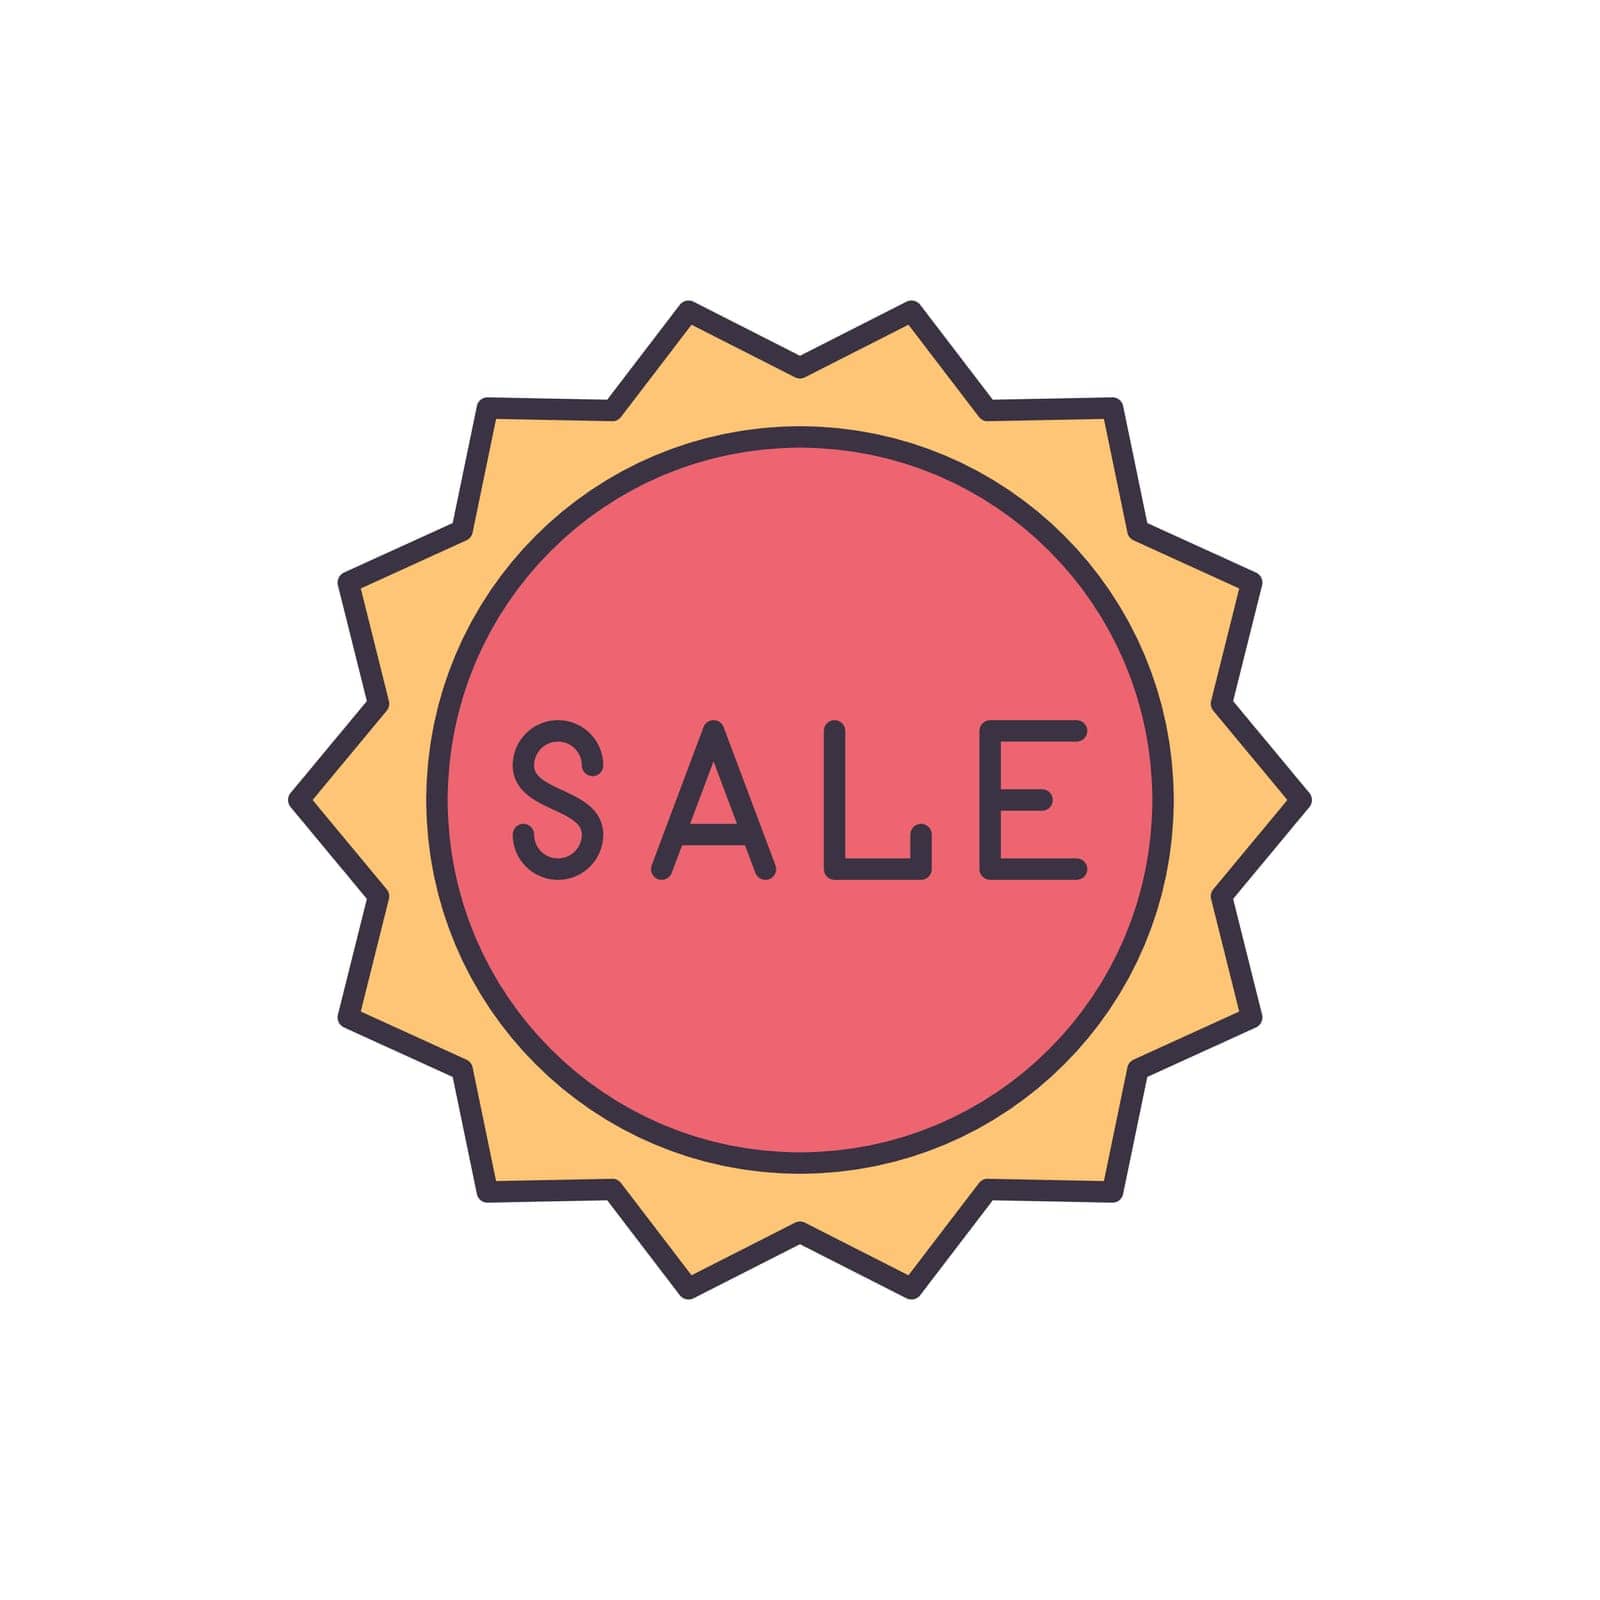 Sale Badge related vector icon. Isolated on white background. Vector illustration